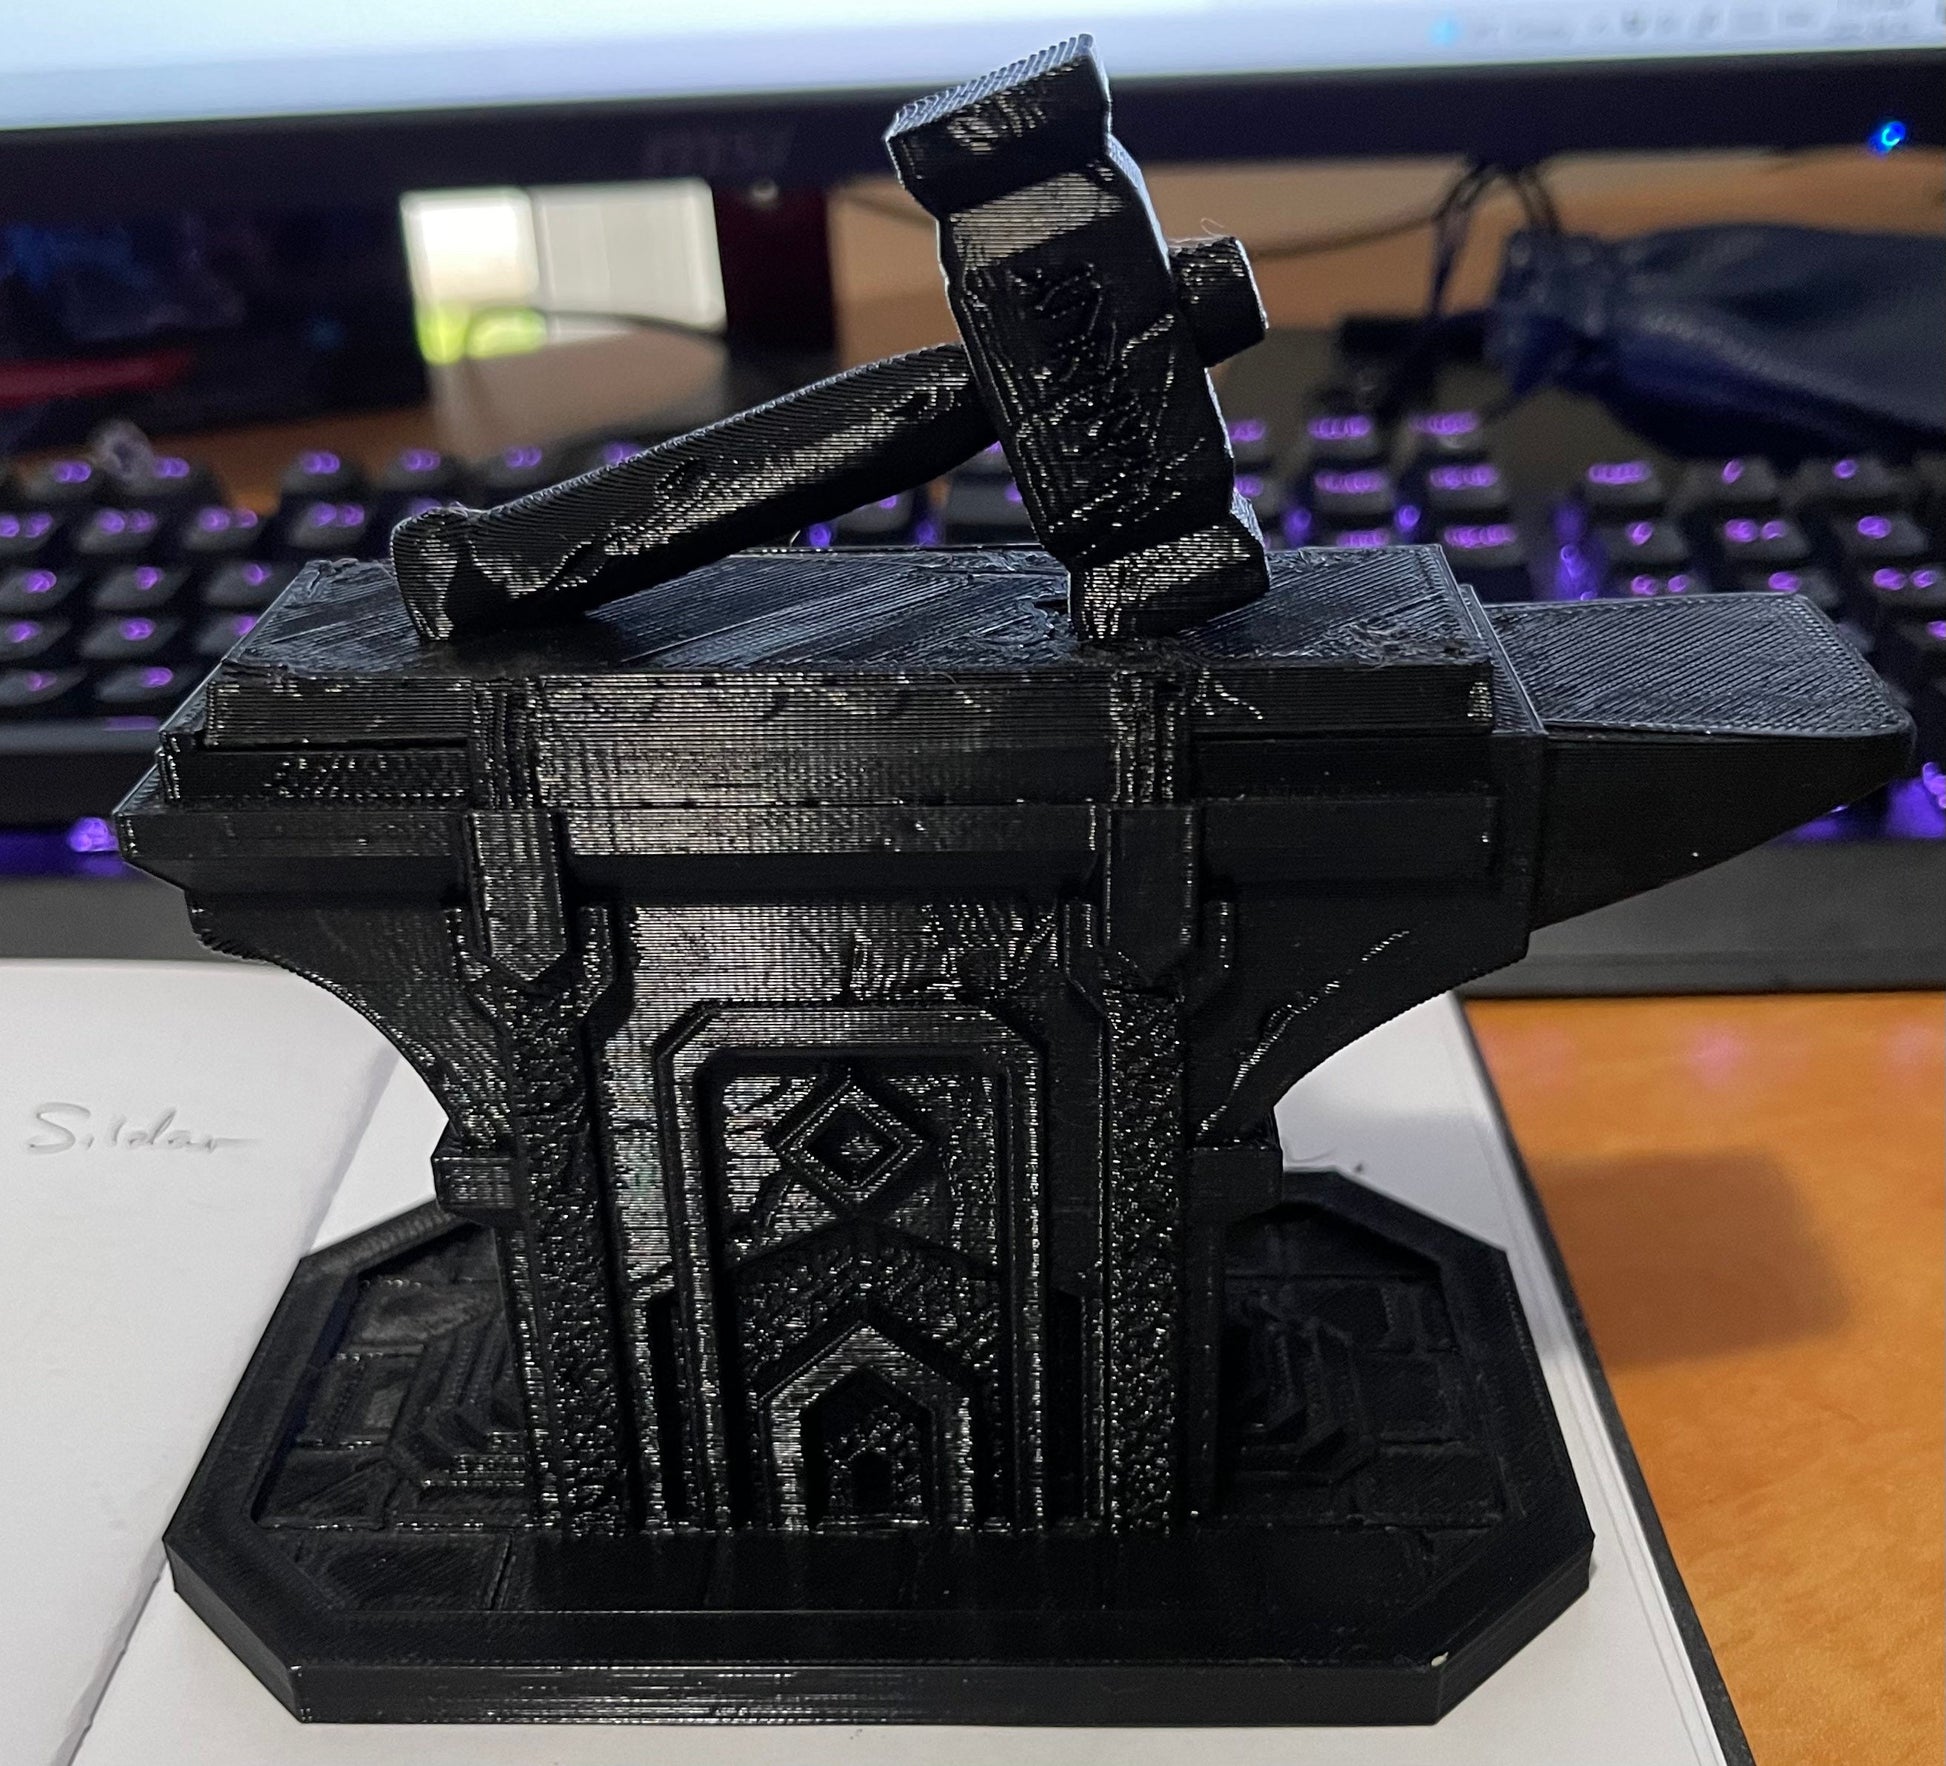 Dwarven Dice Tower and Vault - Mythic Roll - Tabletop RPGs / D&D / Pathfinder